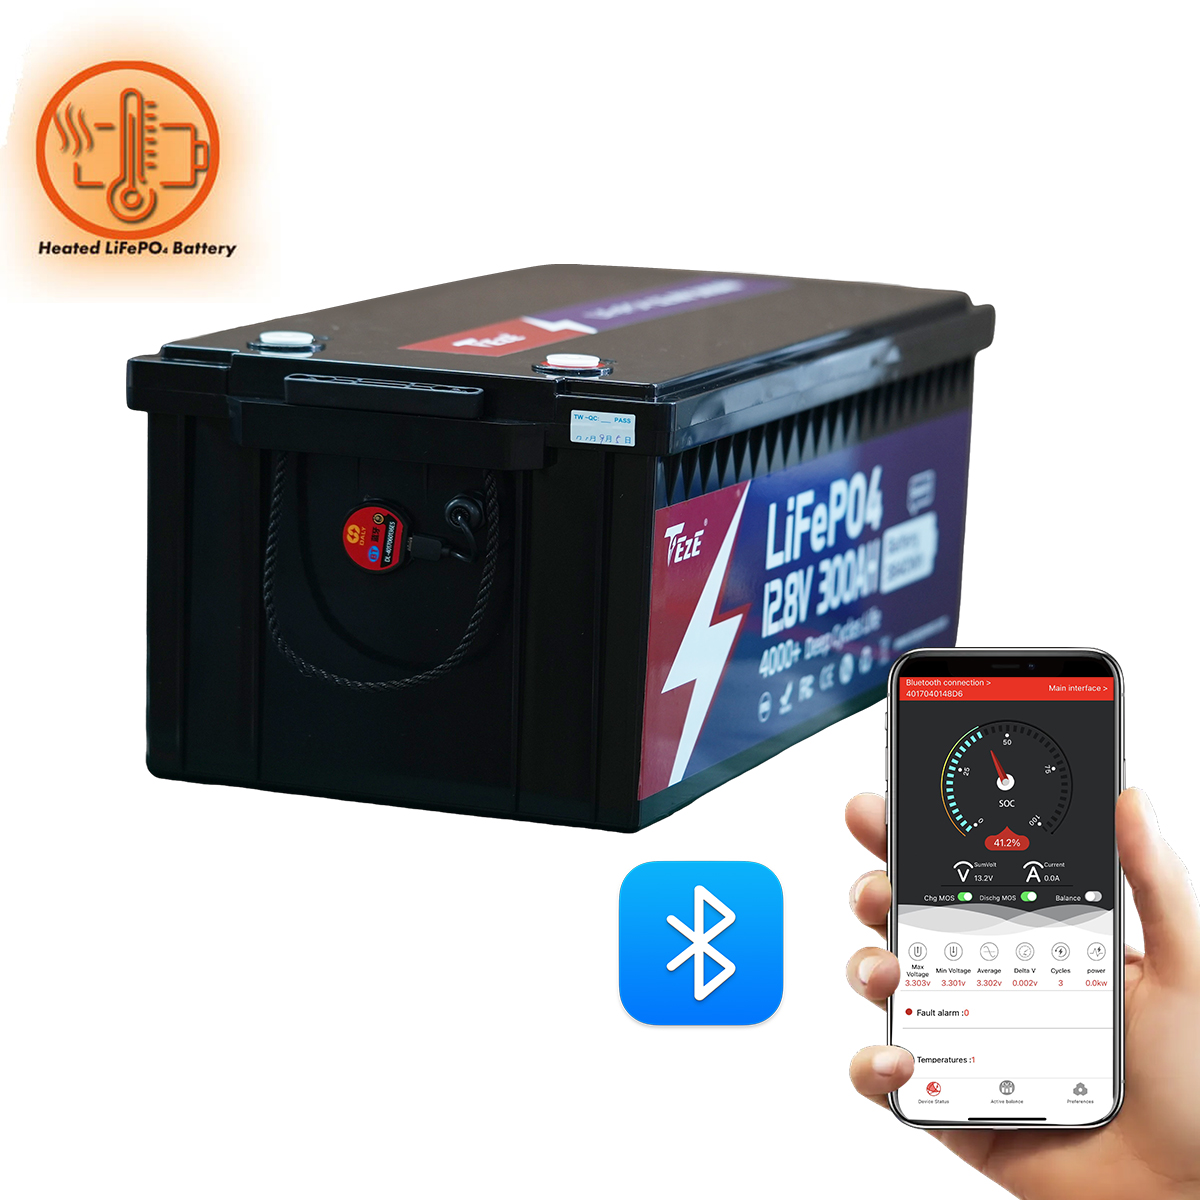 NEW-TezePower 12V300Ah LiFePO4 Battery with RS485/RS232/CAN Communication Ports, Bluetooth, Self-heating and Active Balancer, Built-in 200A Daly BMS (Bluetooth External Version)-TezePower